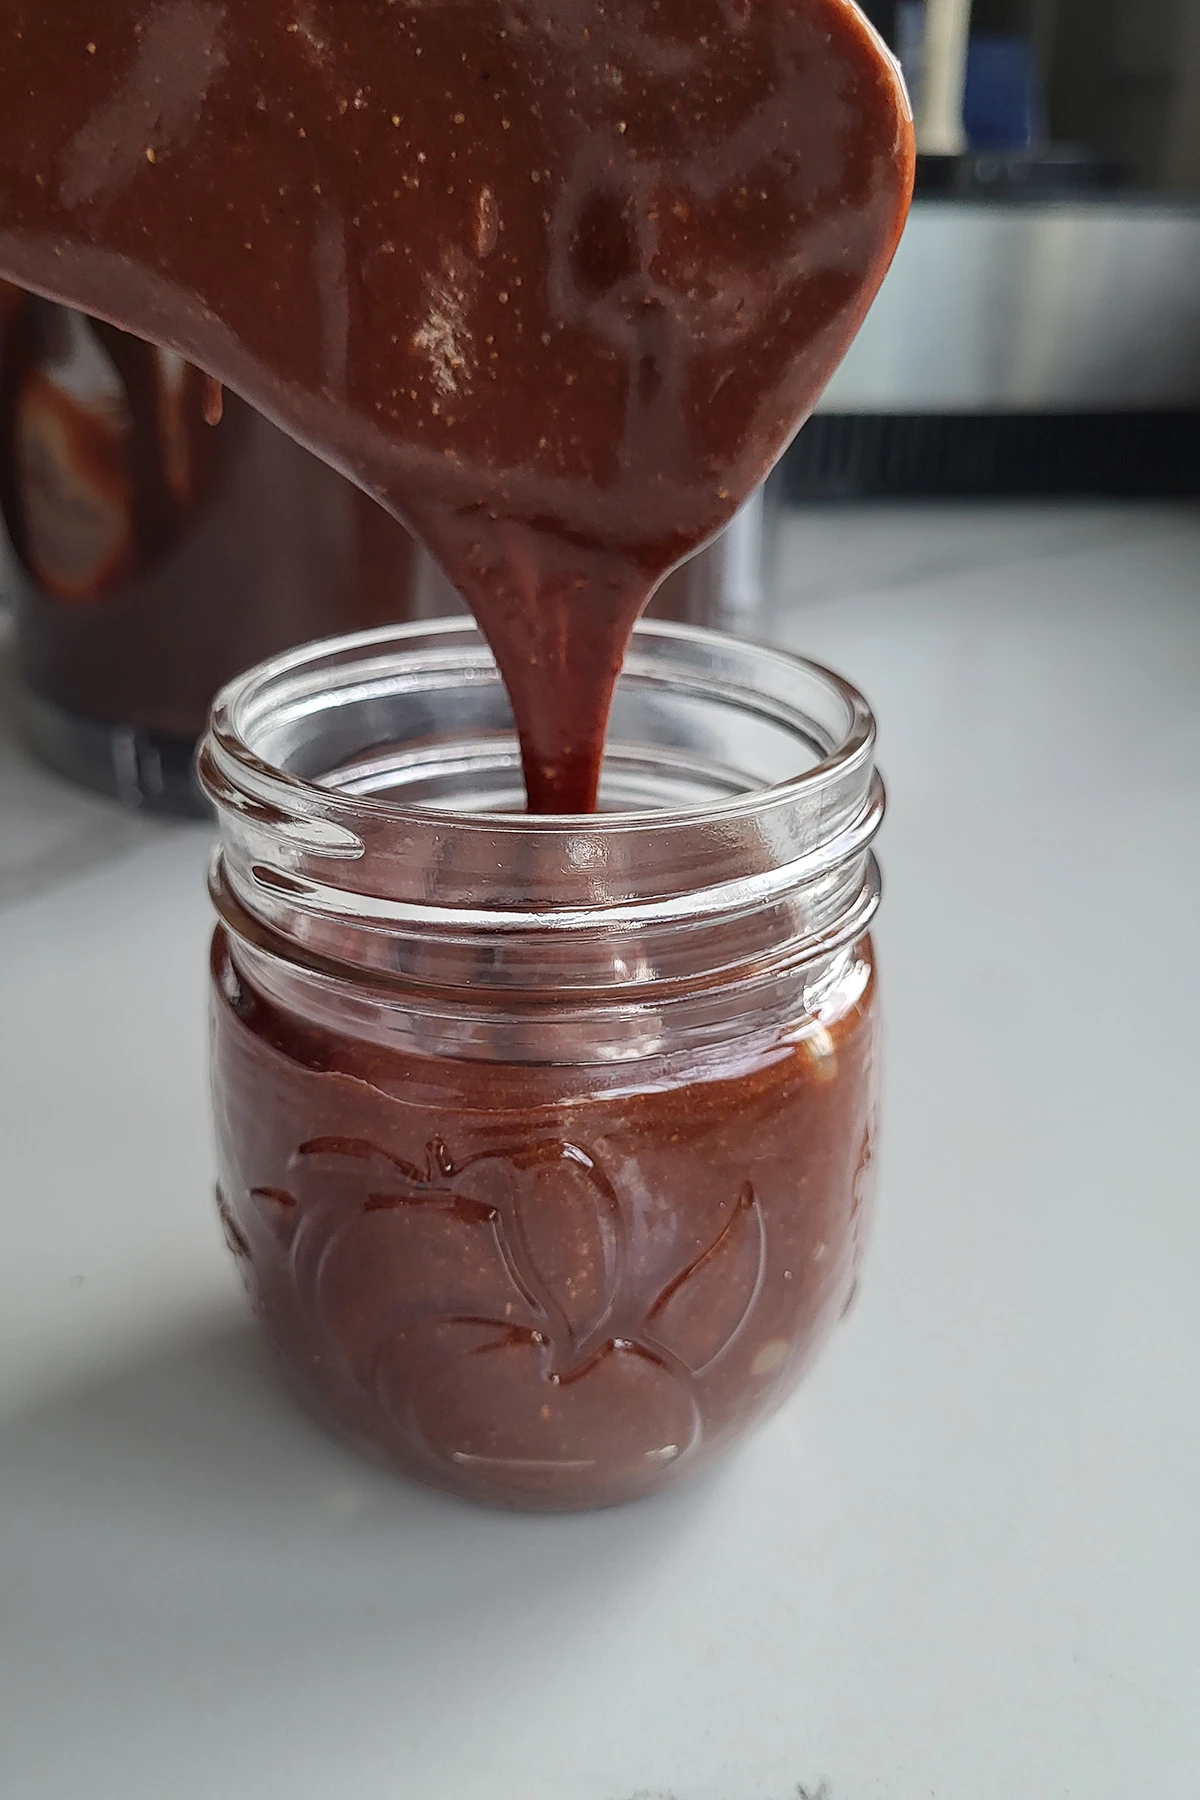 Chocolate spread pouring into a jar.